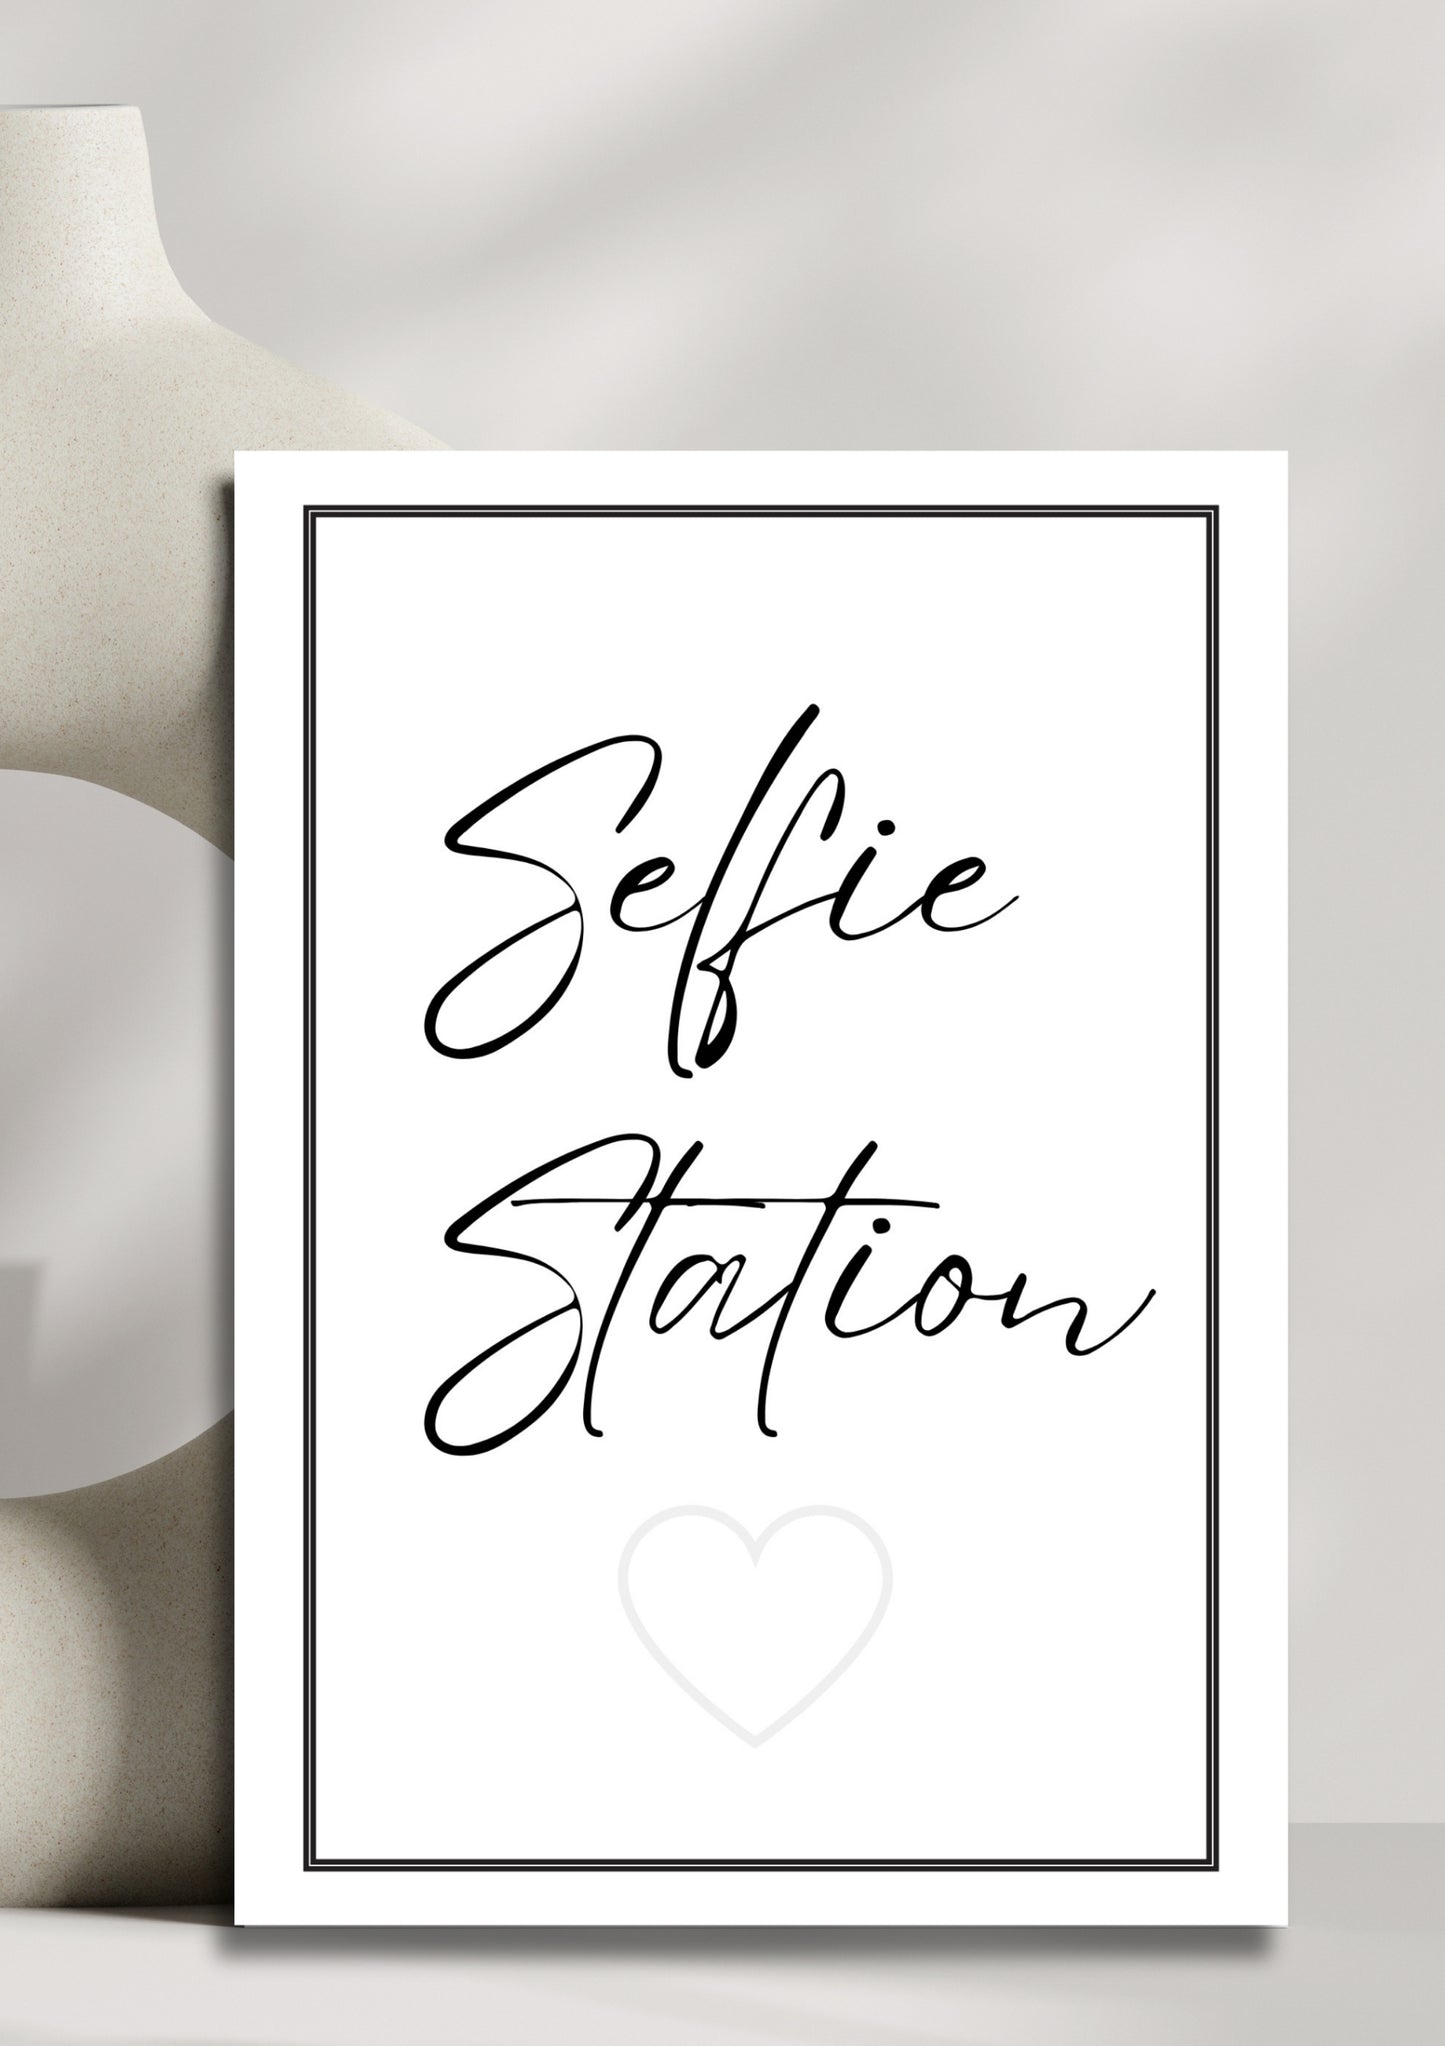 White stone collection - Selfie station prop sign